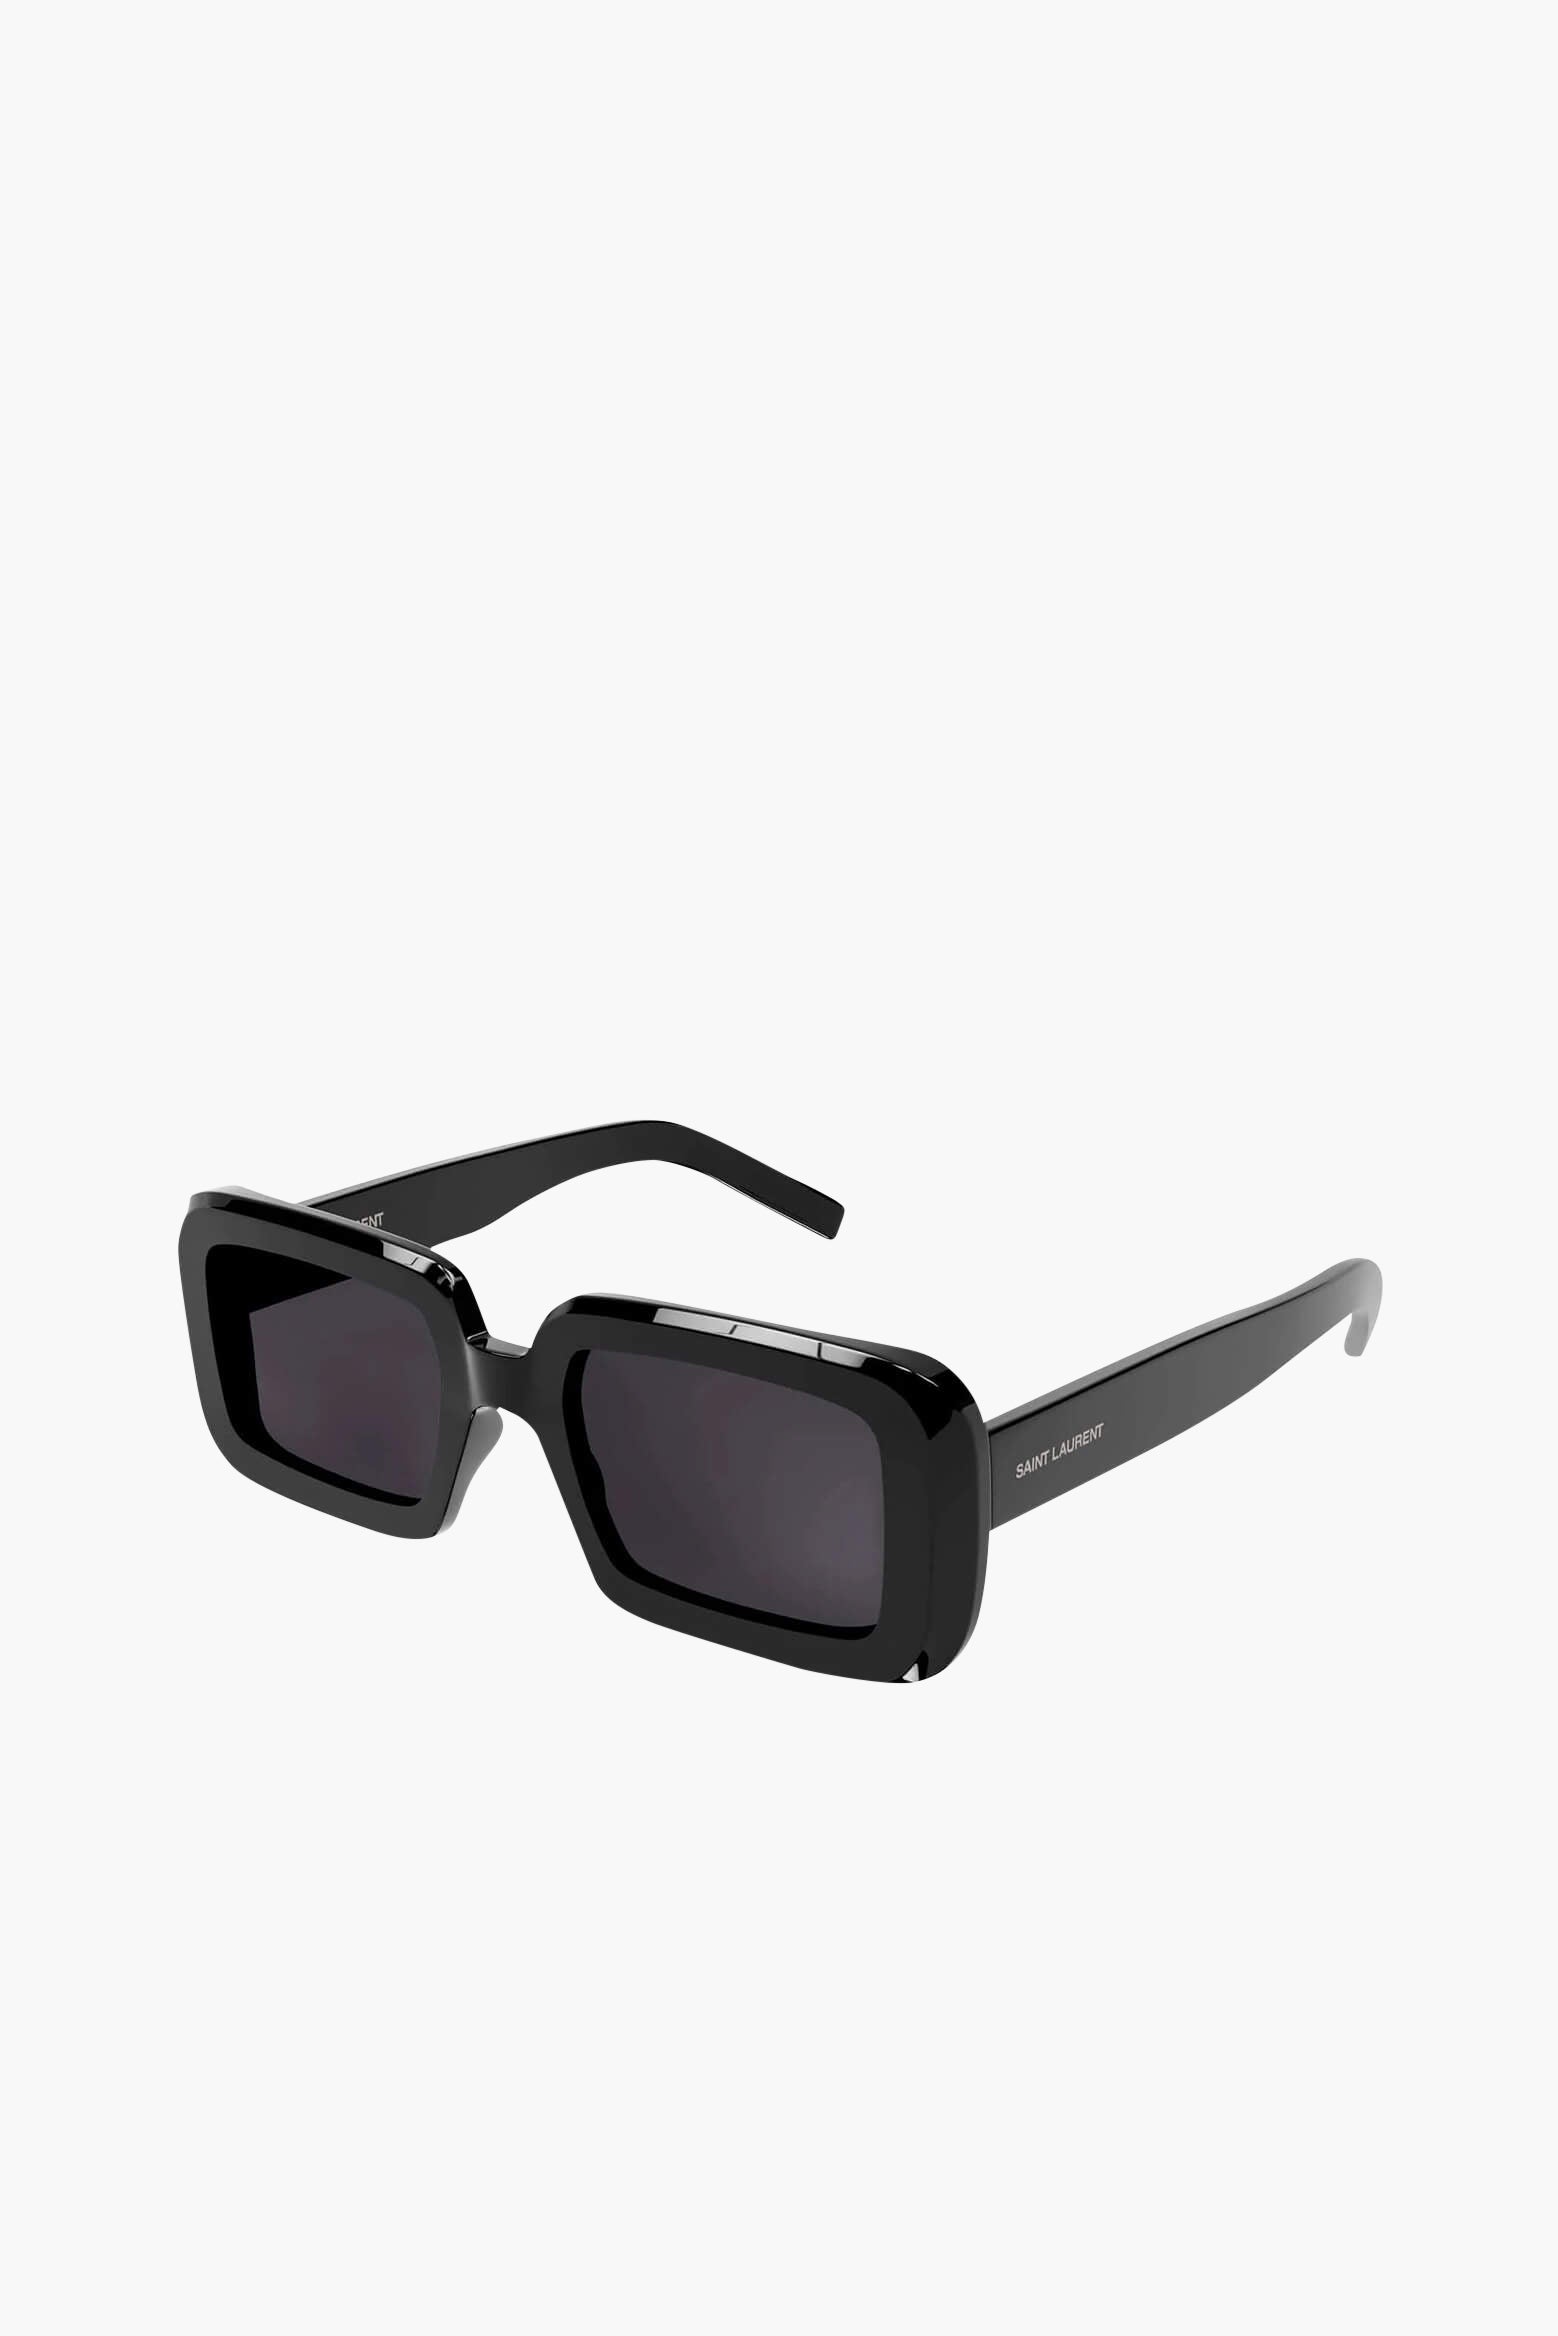 Saint Laurent Bold Rectangle Sunglasses in Black from The New Trend